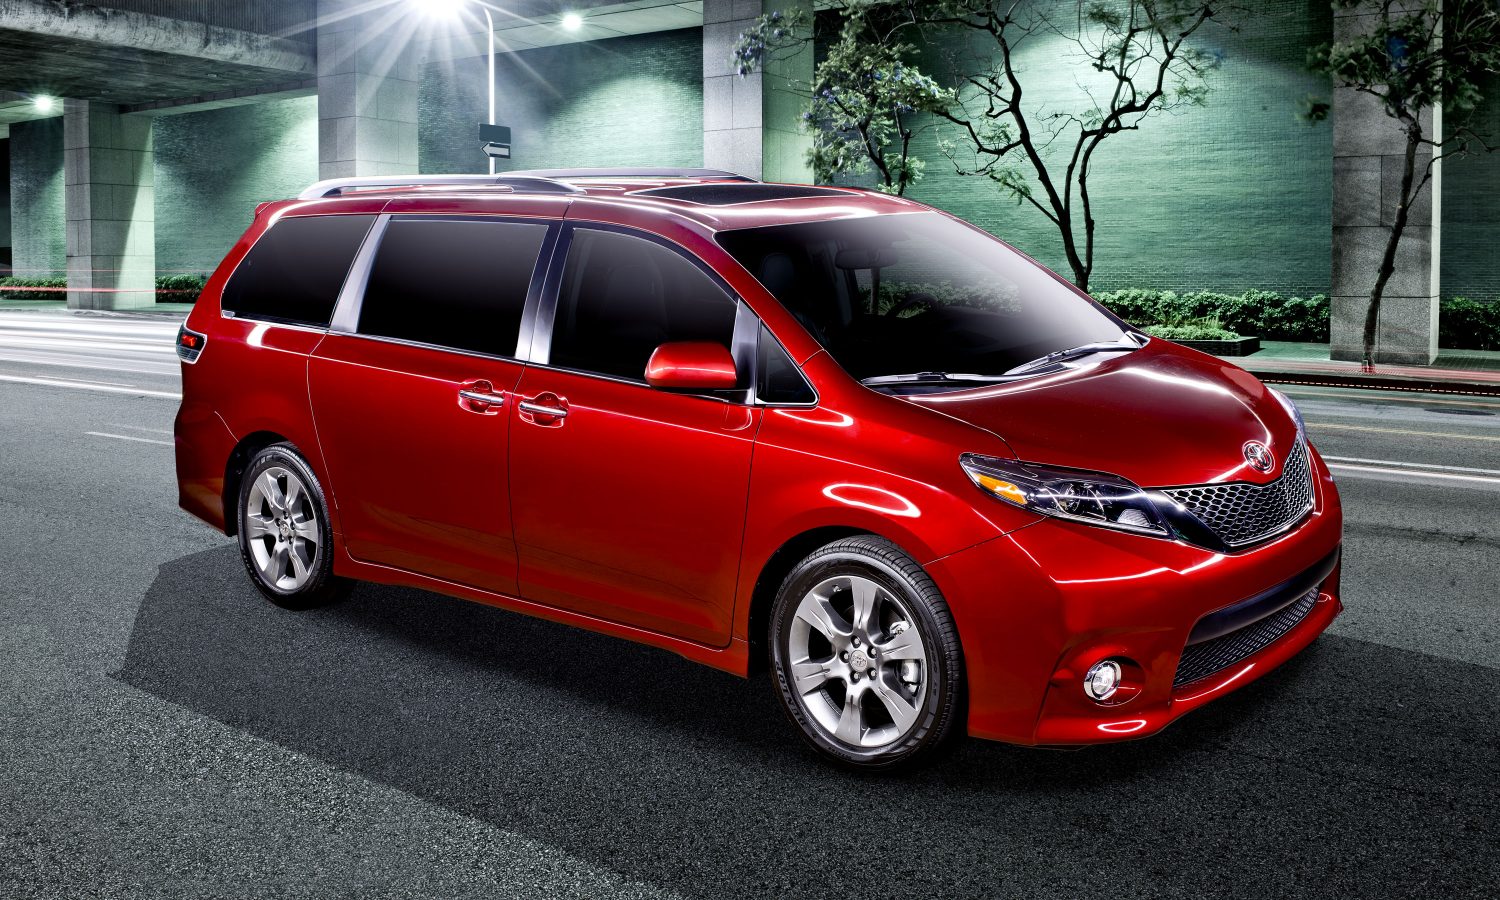 Swagger On! 2017 Sienna Revs up with More Power and Efficiency - Toyota USA  Newsroom